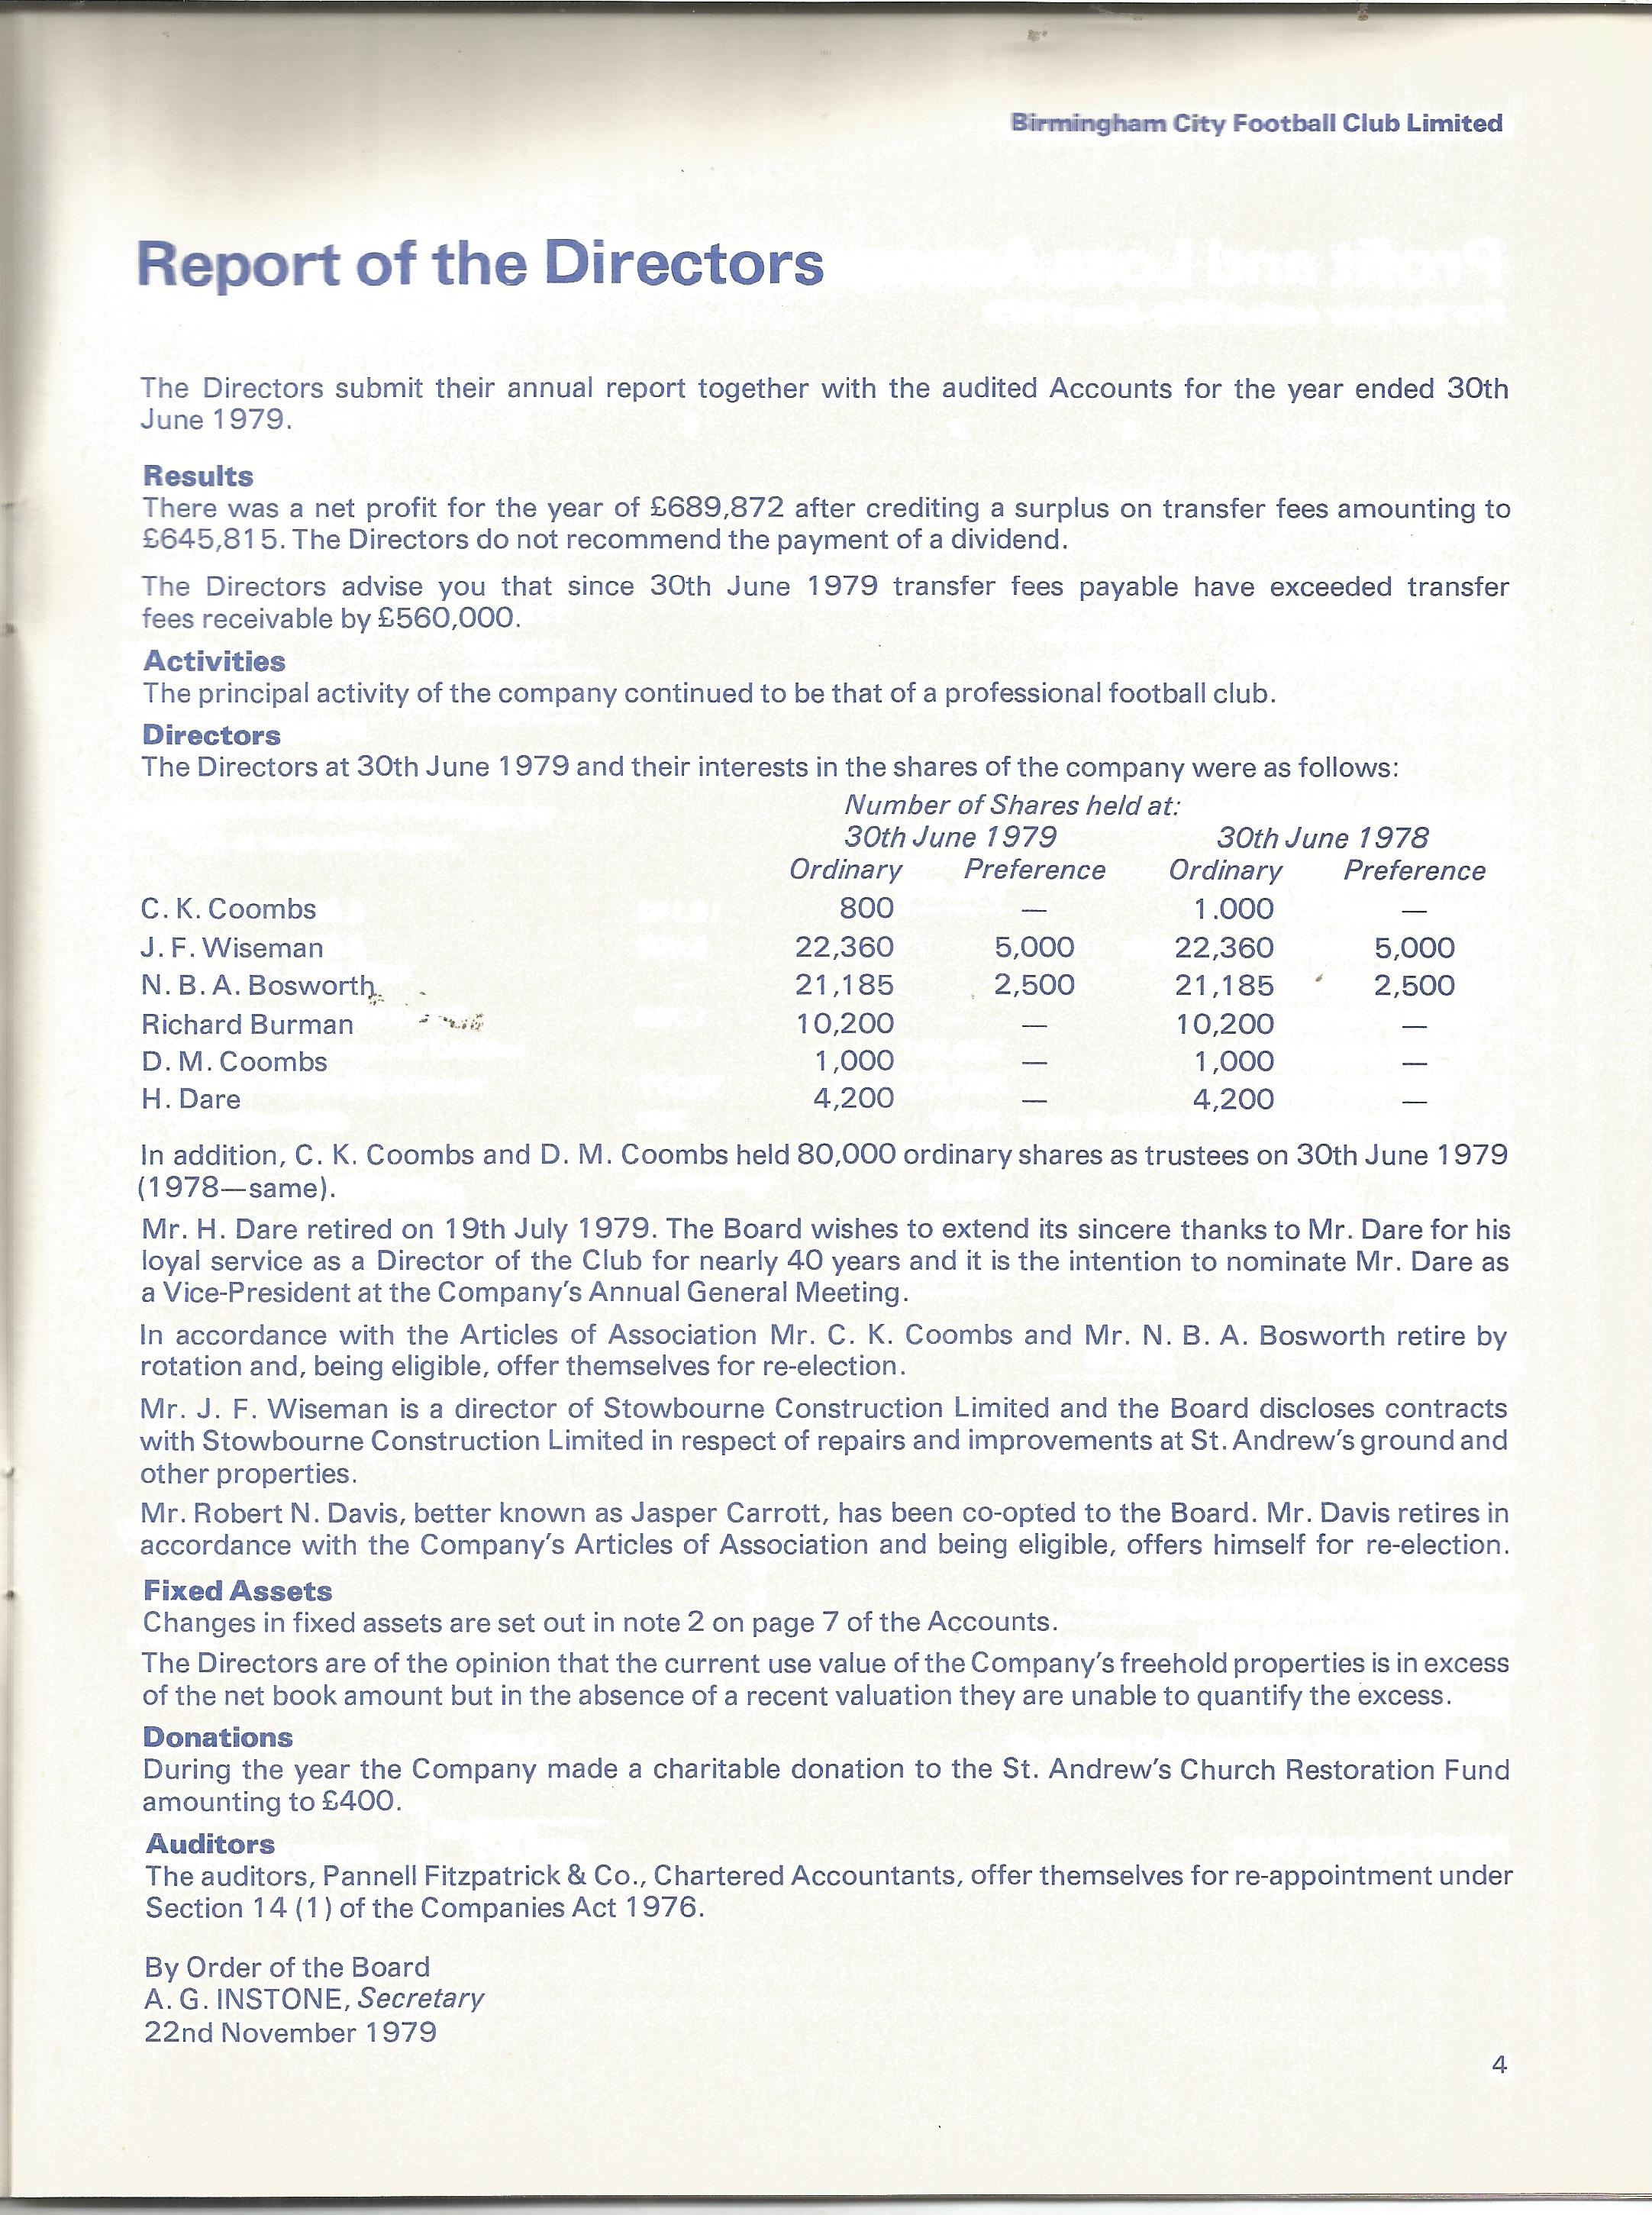 Birmingham City annual report and accounts booklet for the year ended 30th June 1979. Good - Image 2 of 2